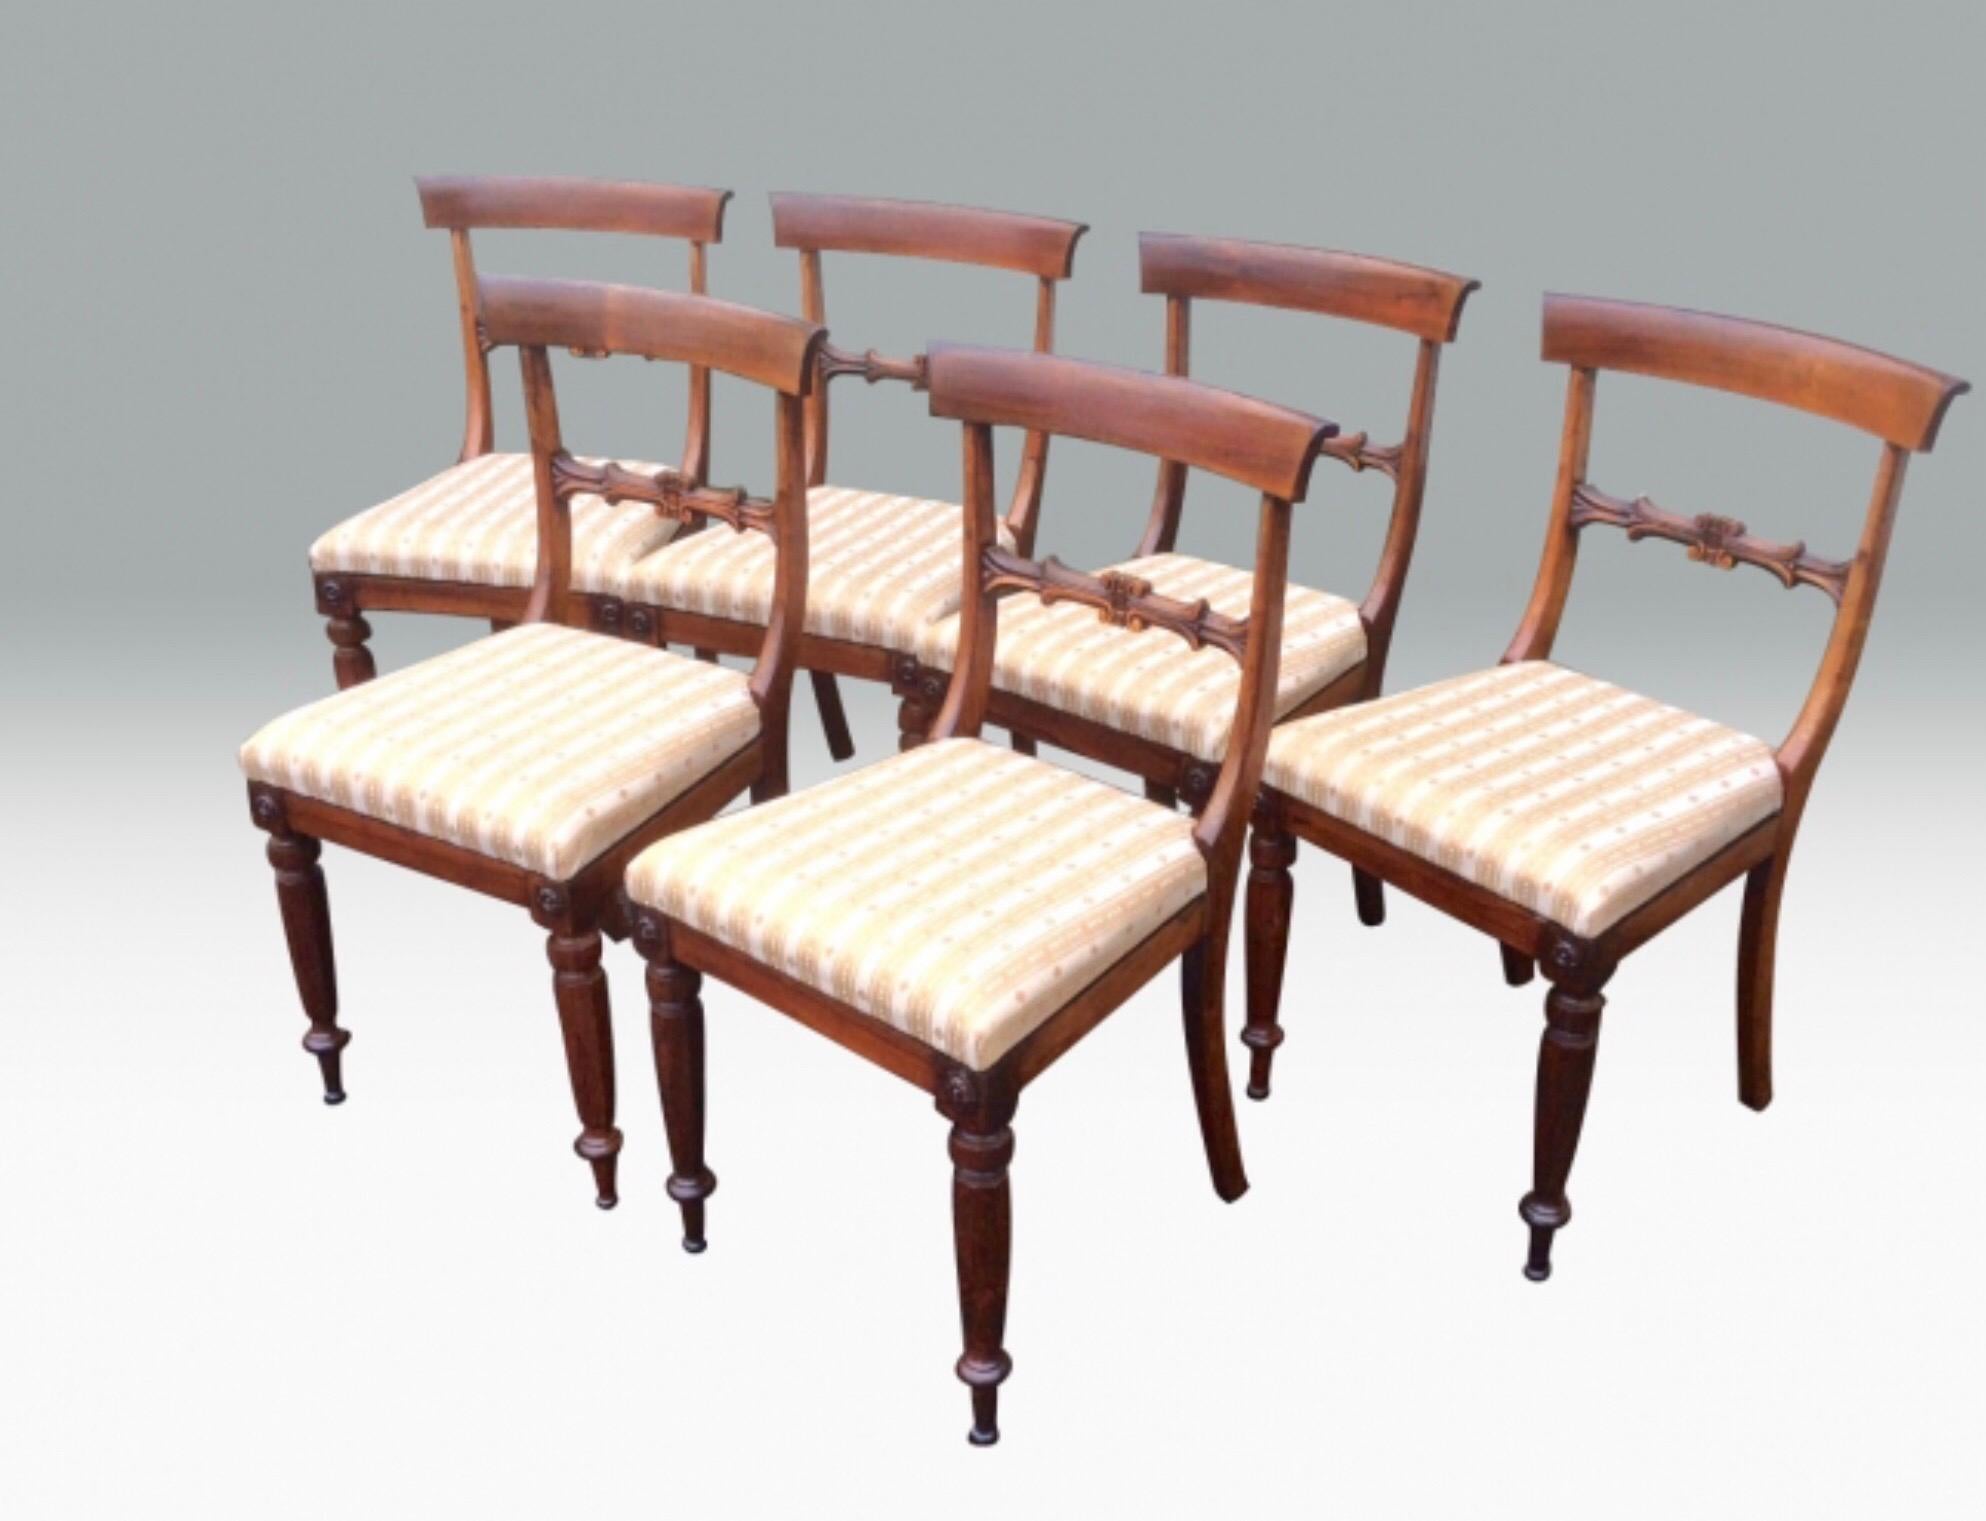 Fabulous set of six antique period Regency rosewood dining chairs in fabulous colour and condition.
Drop-in Seats.
All strong of joint
Circa 1820.
Measures: 35ins high x 19.5ins wide x 19.5ins deep.
Seat height 18.5ins.